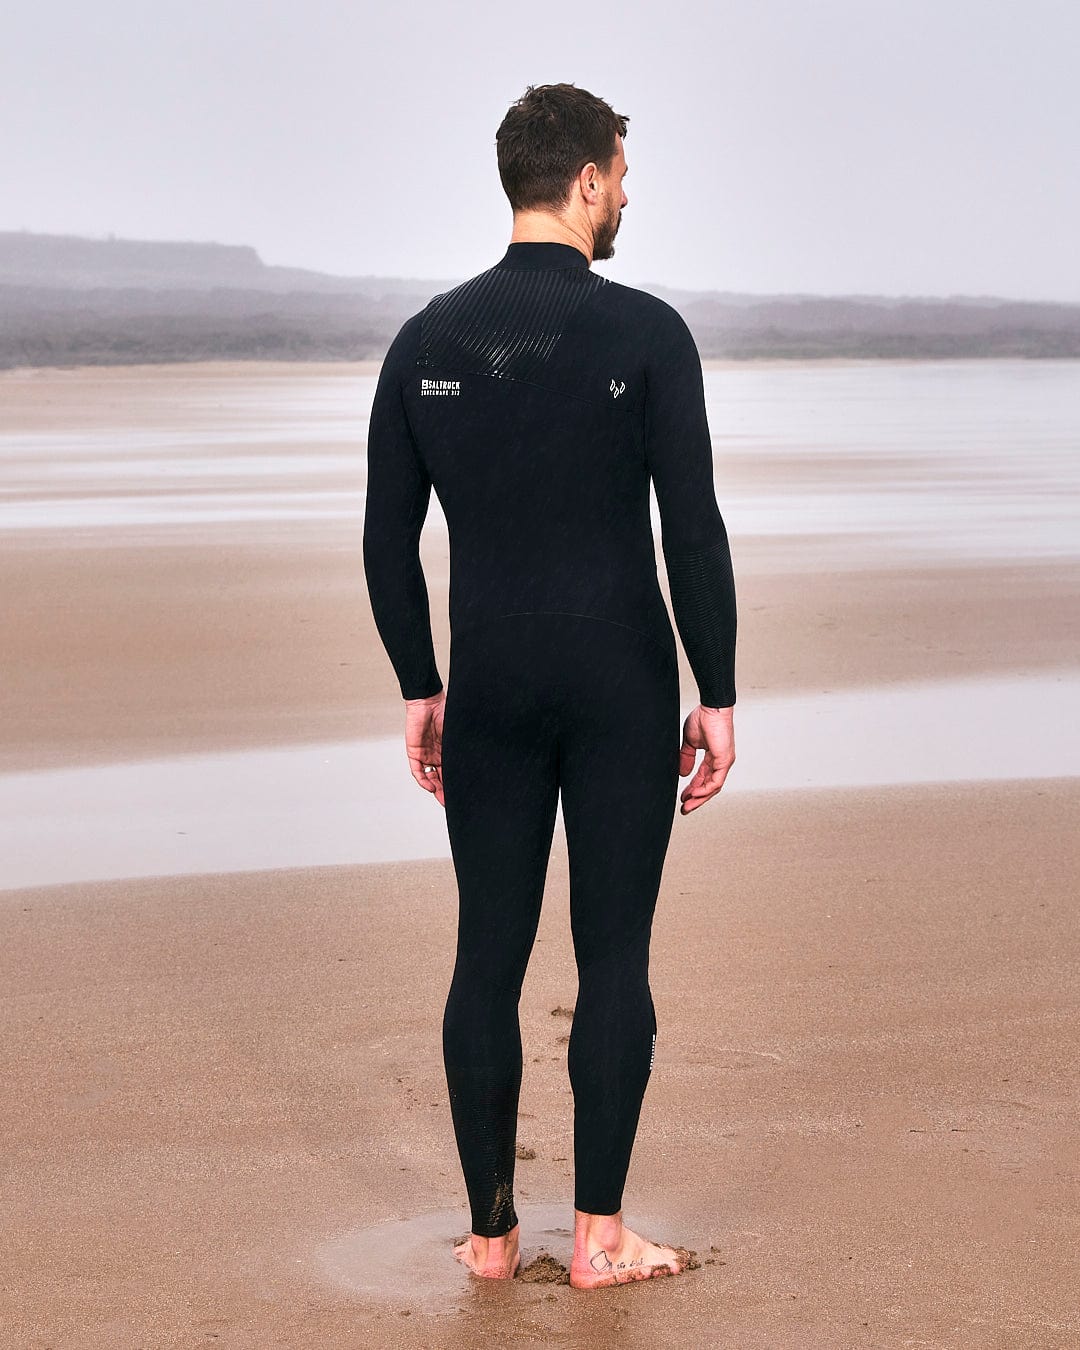 A man in a Saltrock Shockwave - Mens 3/2 Chest Zip Full Wetsuit - Black standing on the beach.